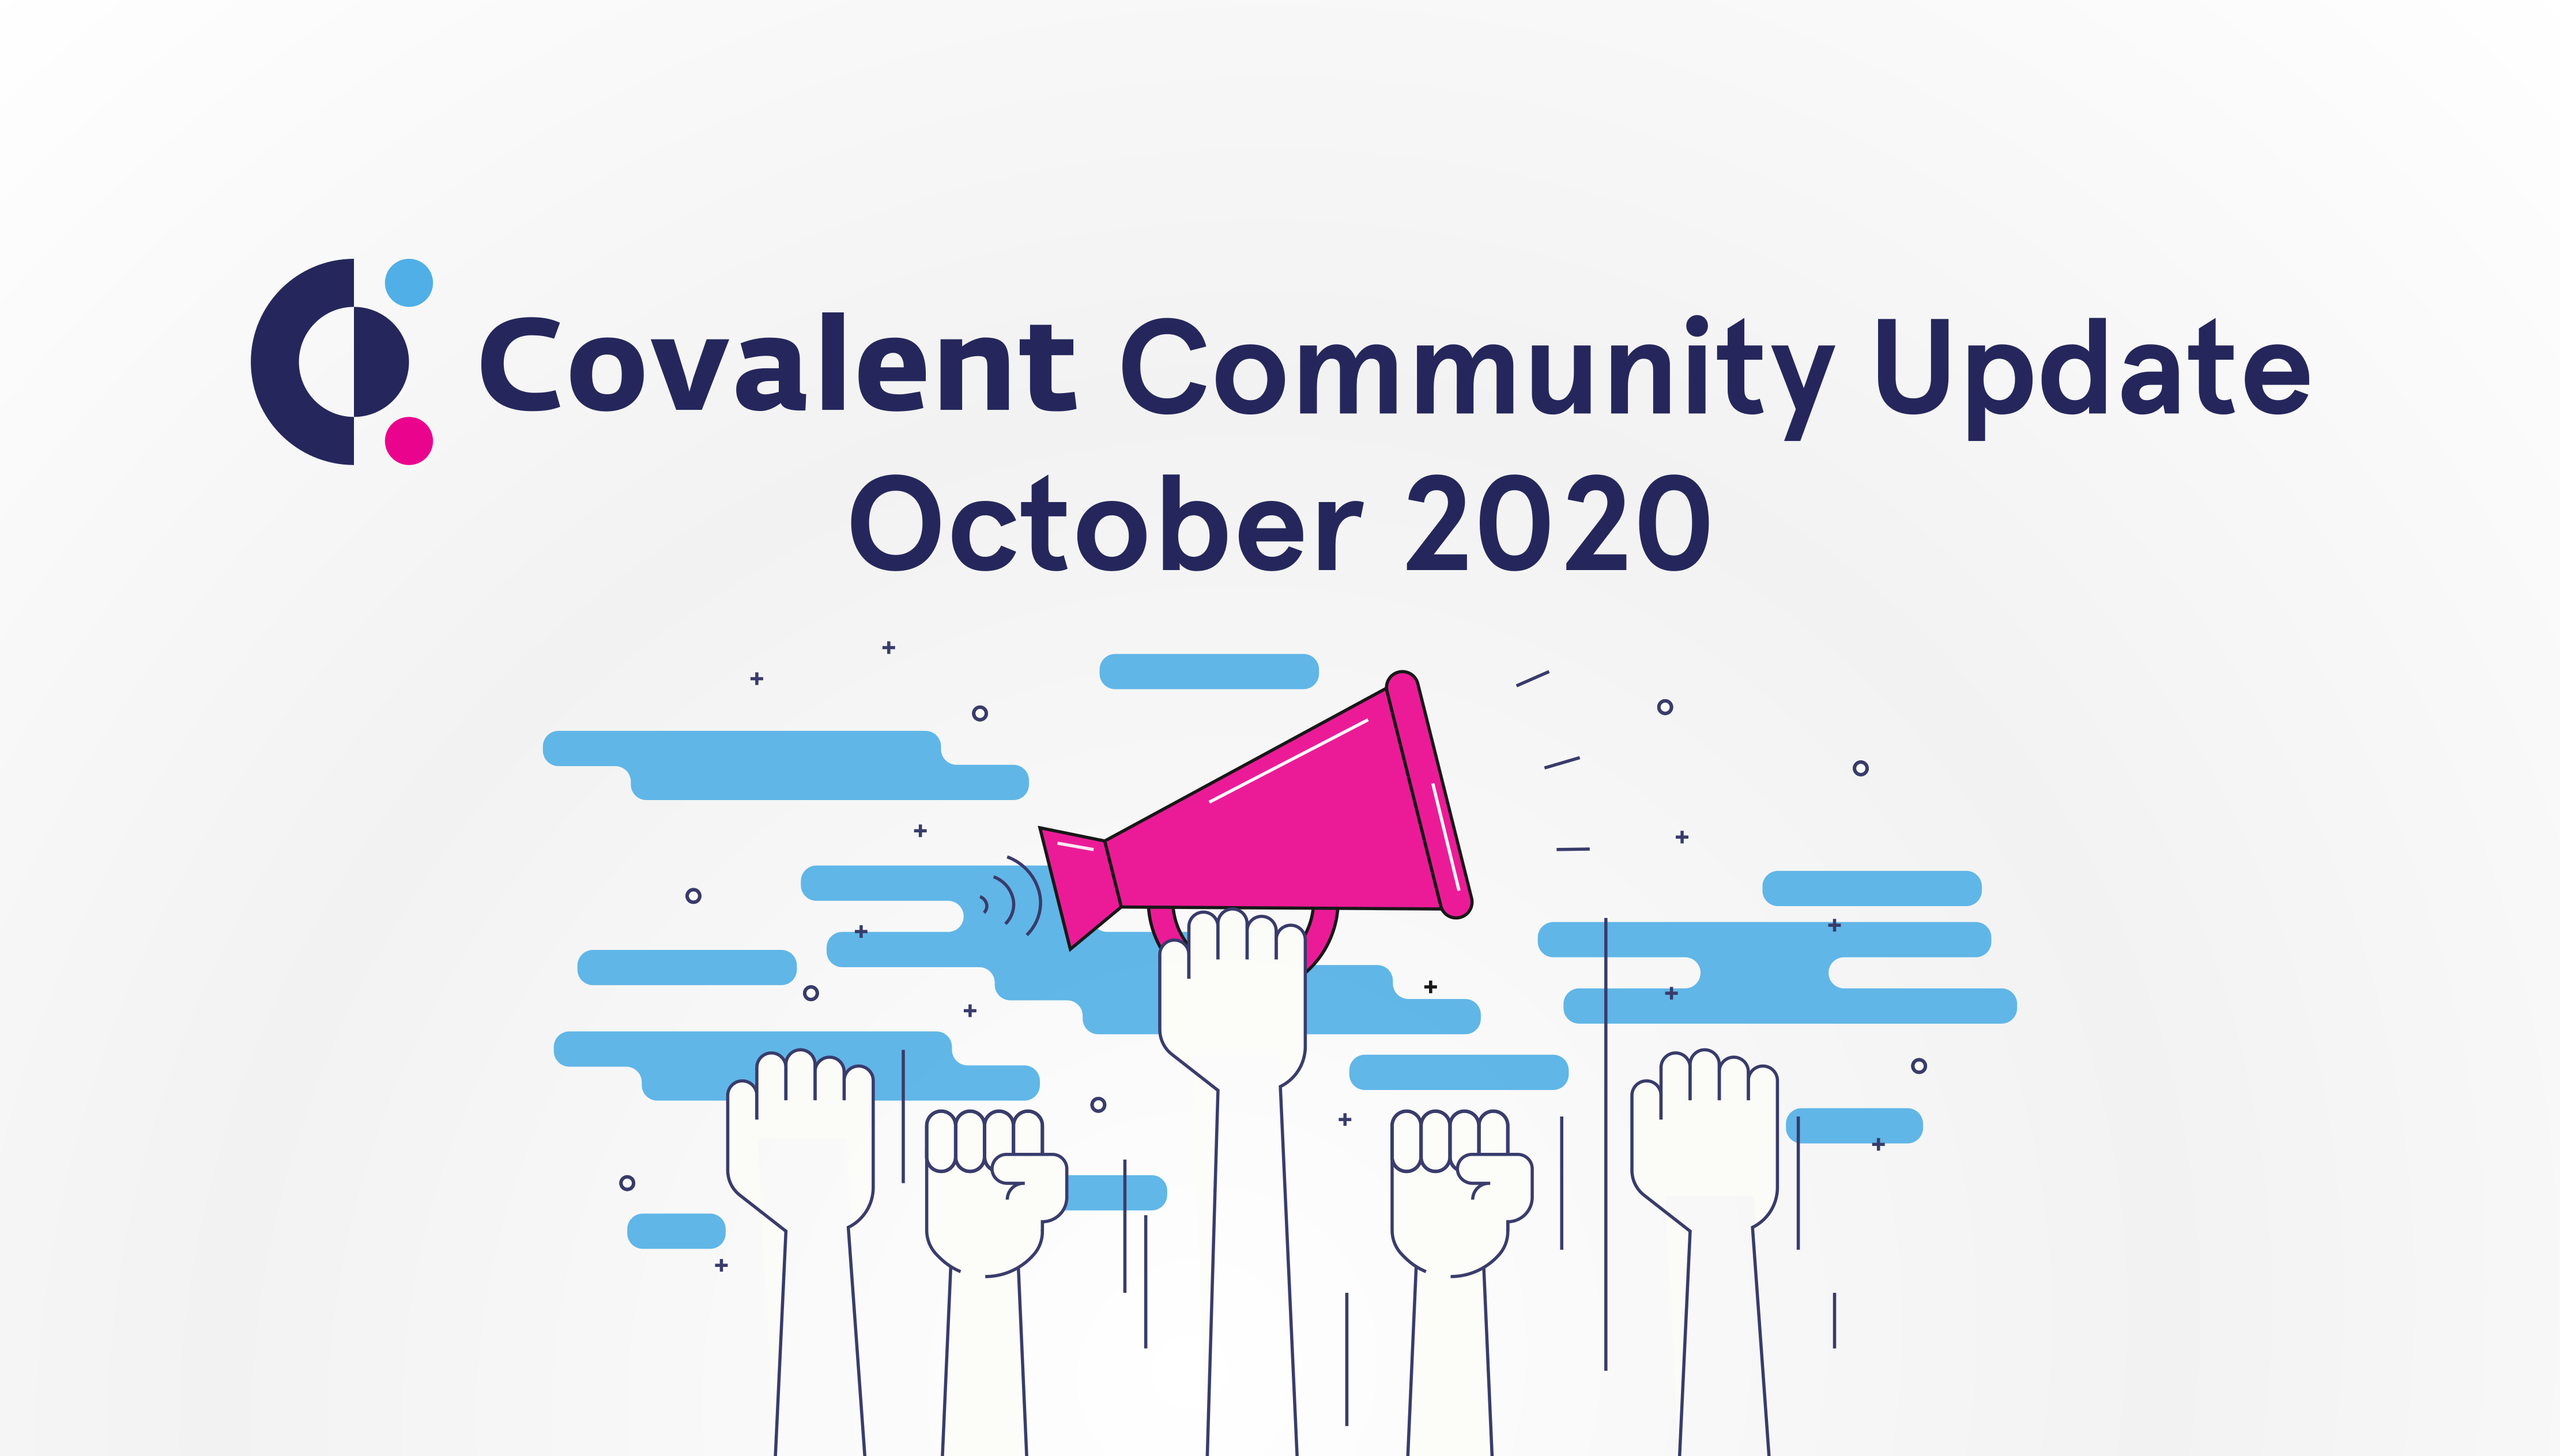 Covalent Community Update: October 2020 | Covalent